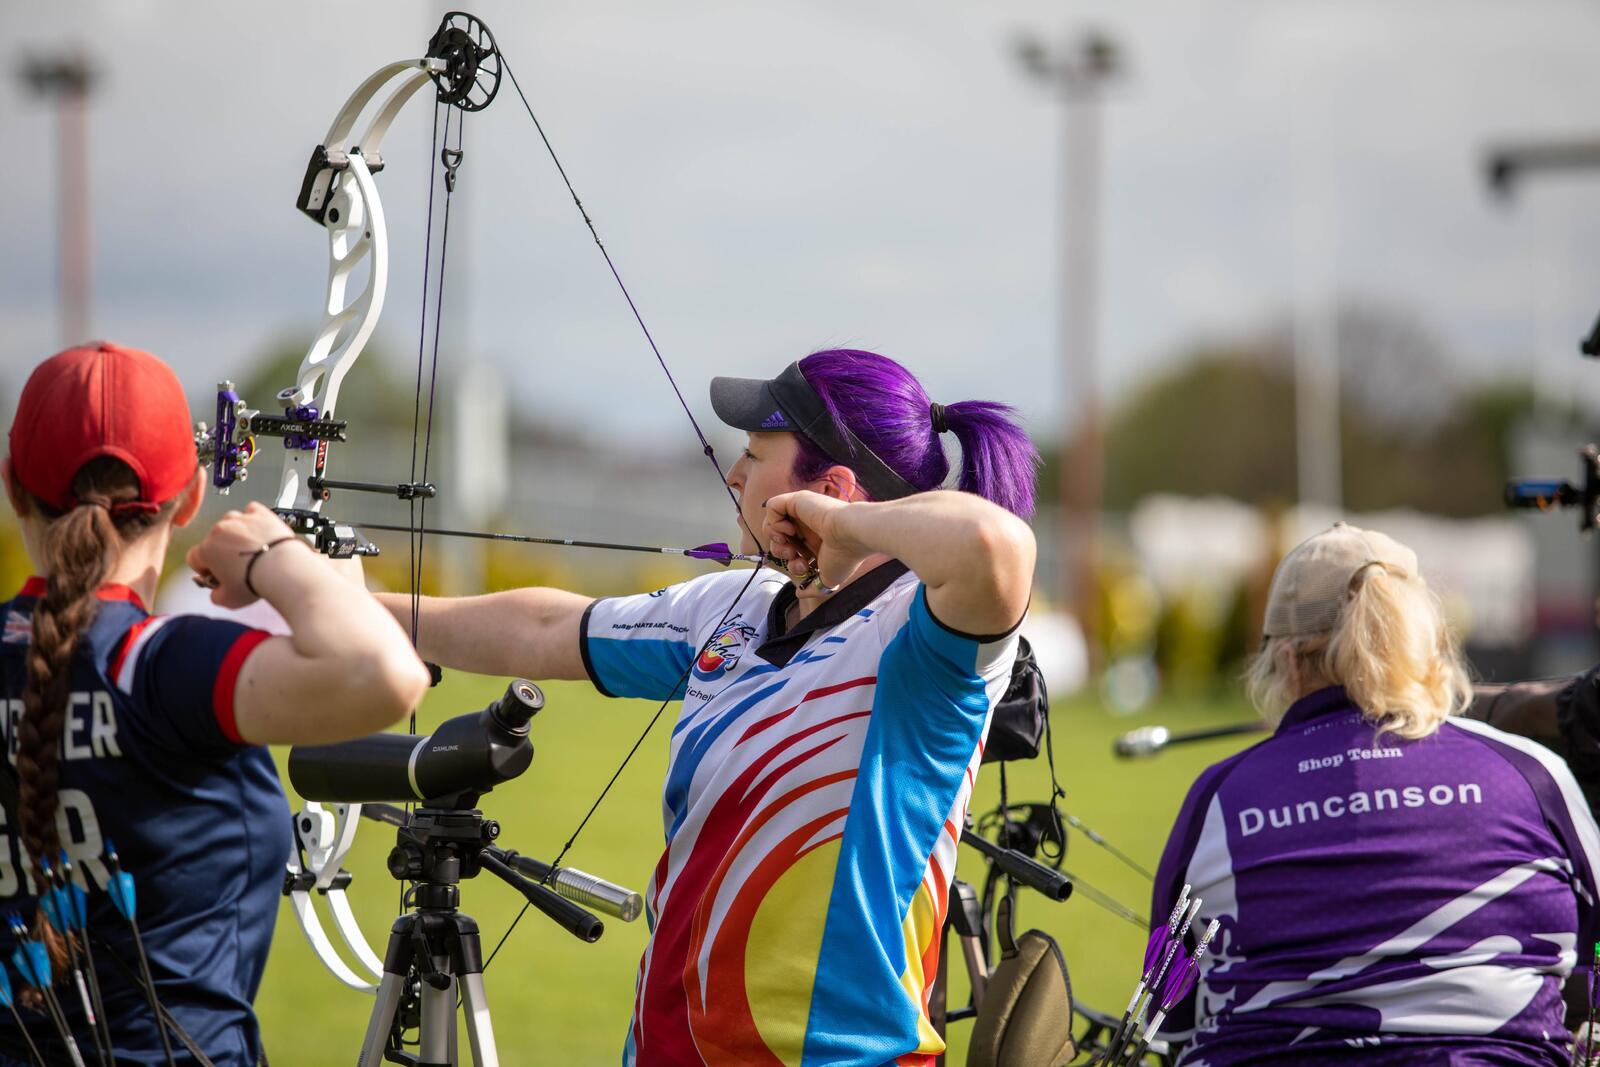 Archers on the shooting line at a competition